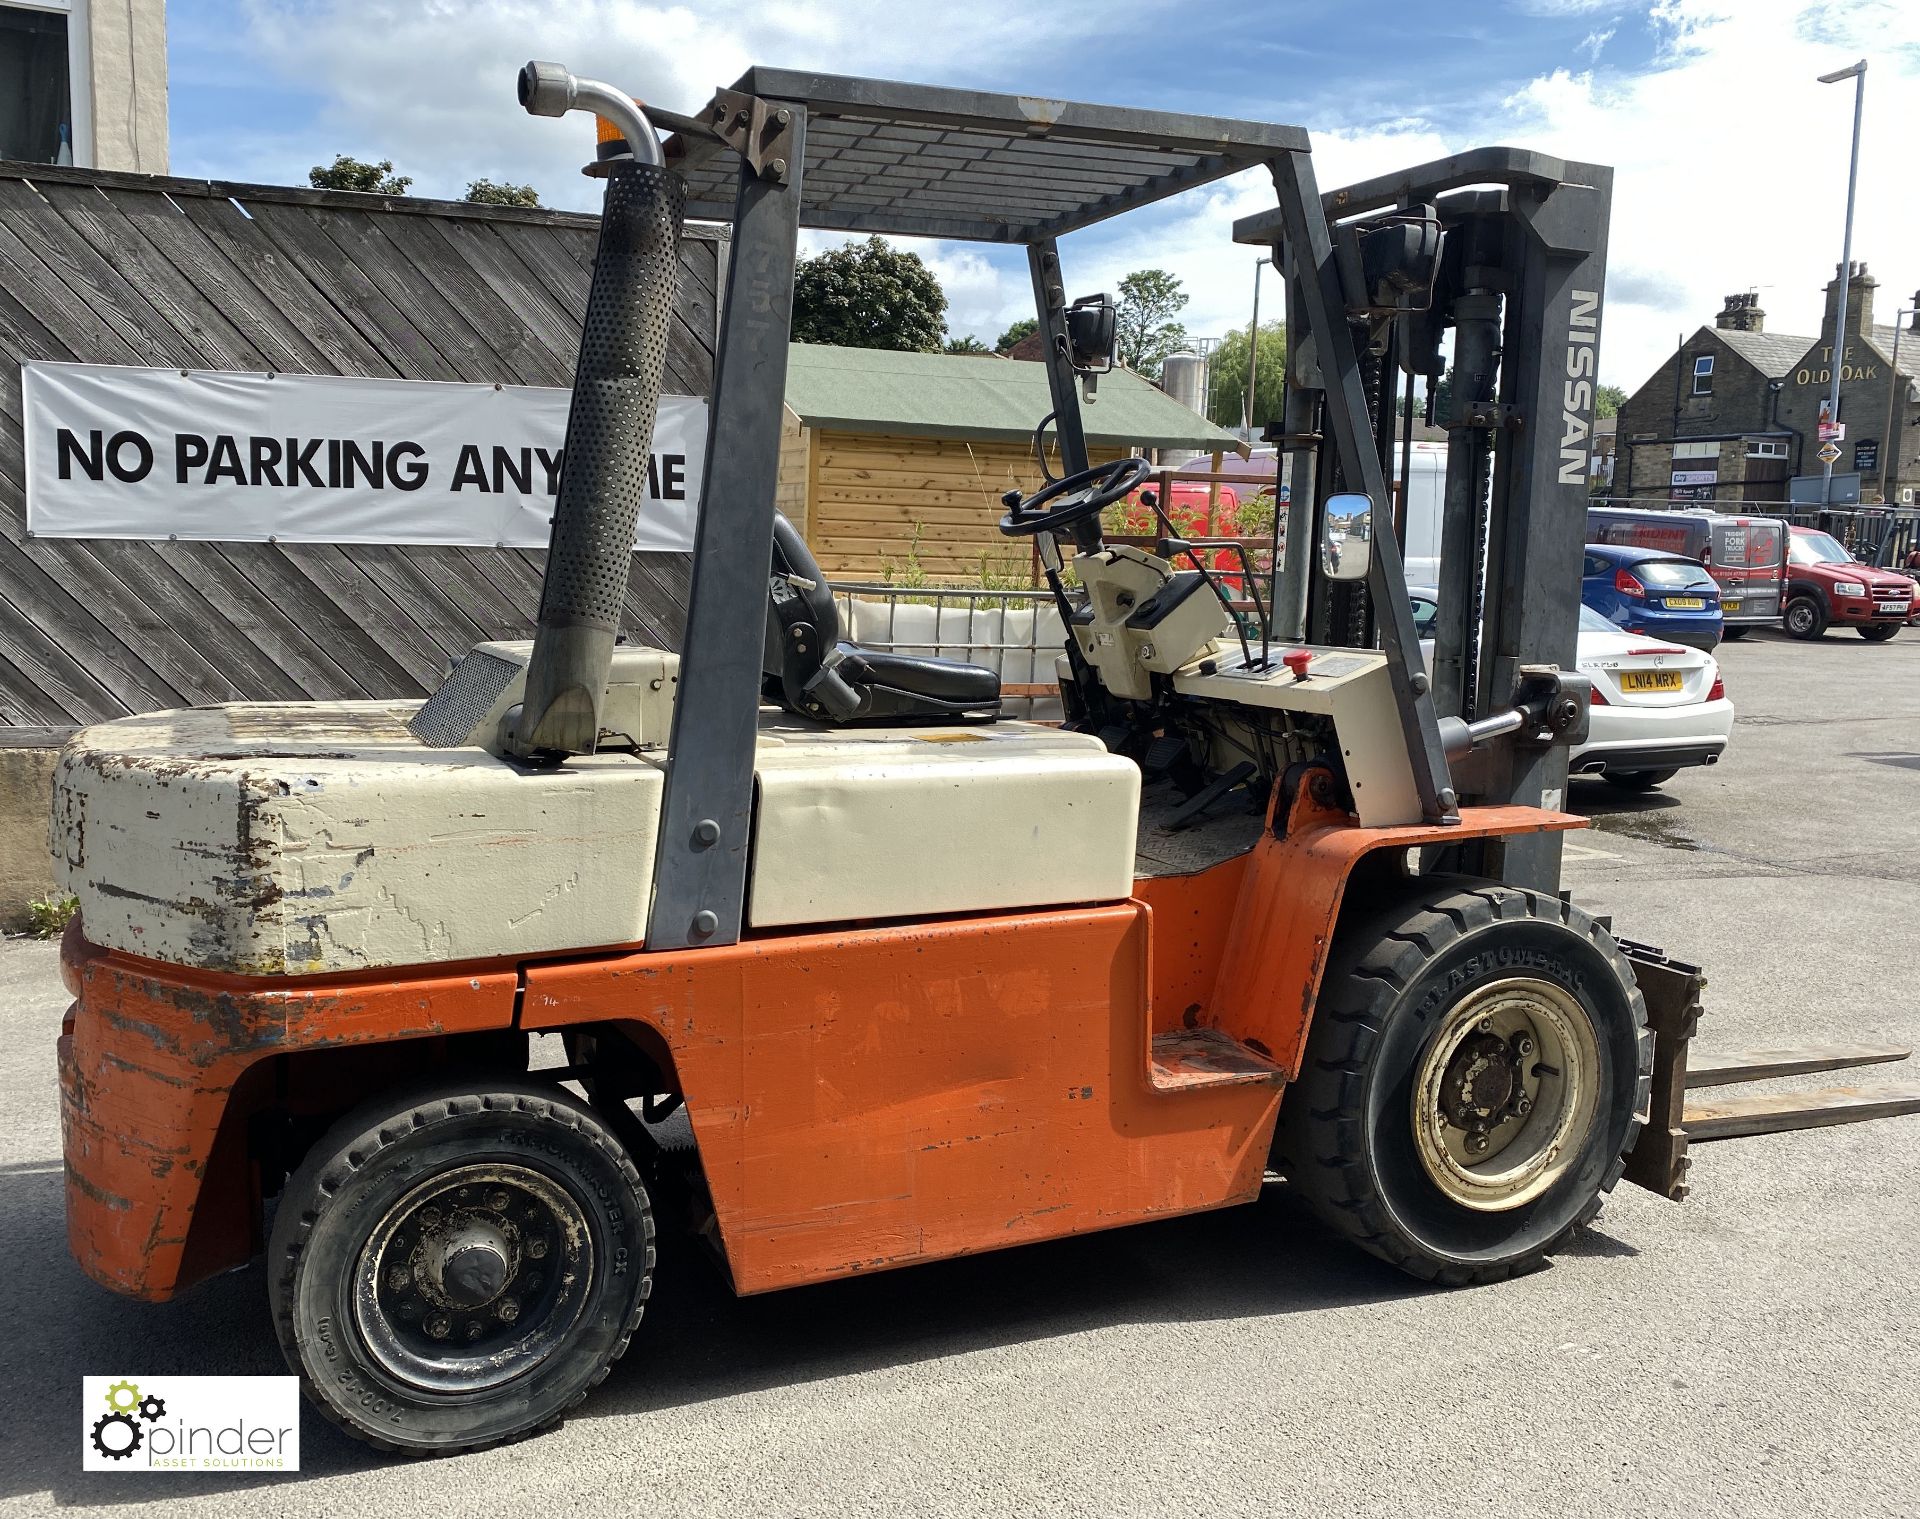 Nissan WGF03A400 diesel Forklift Truck, 4000kg lift capacity, 20478hours, 3300mm lift height, 2250mm - Image 6 of 11